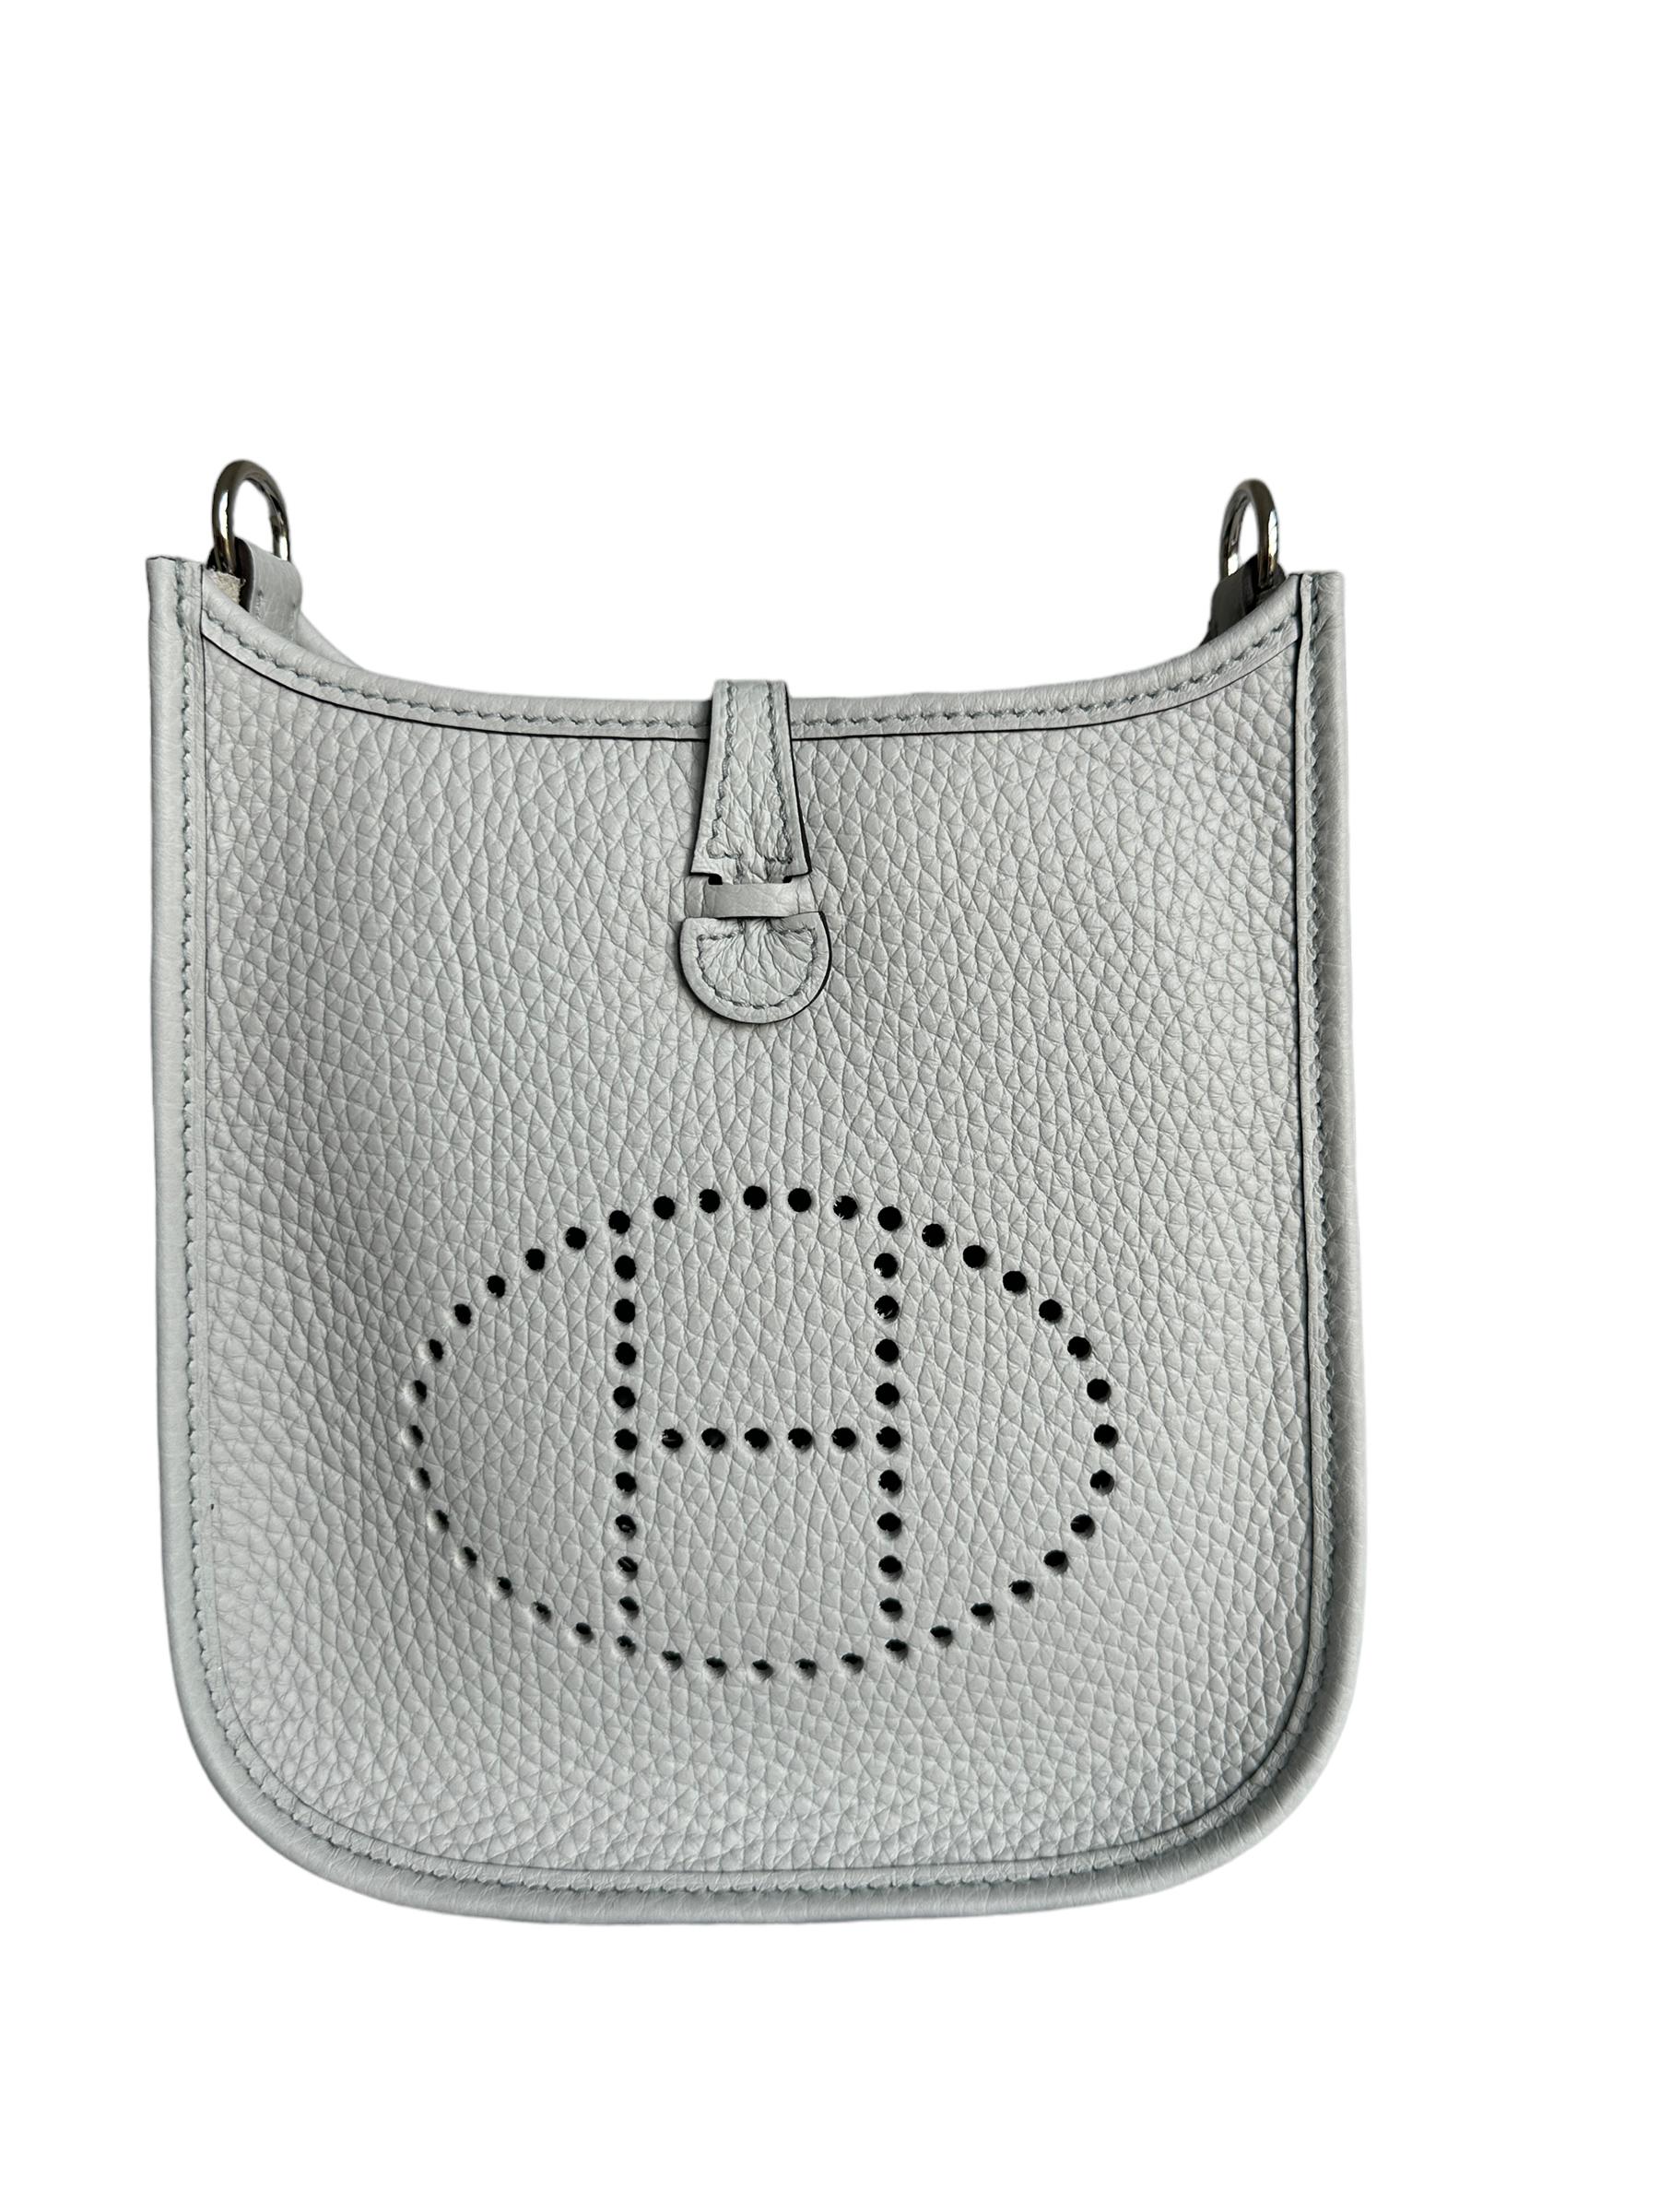 Hermes Evelyne Tpm 16
We have it in stock, ready, store fresh

This is the mini, the smallest size they make
Think spring summer
One of the prettiest colors
Blue Pale
Etain Strap

Collection B
2023
Natural  interior
Palladium  plated hardware
Hermes